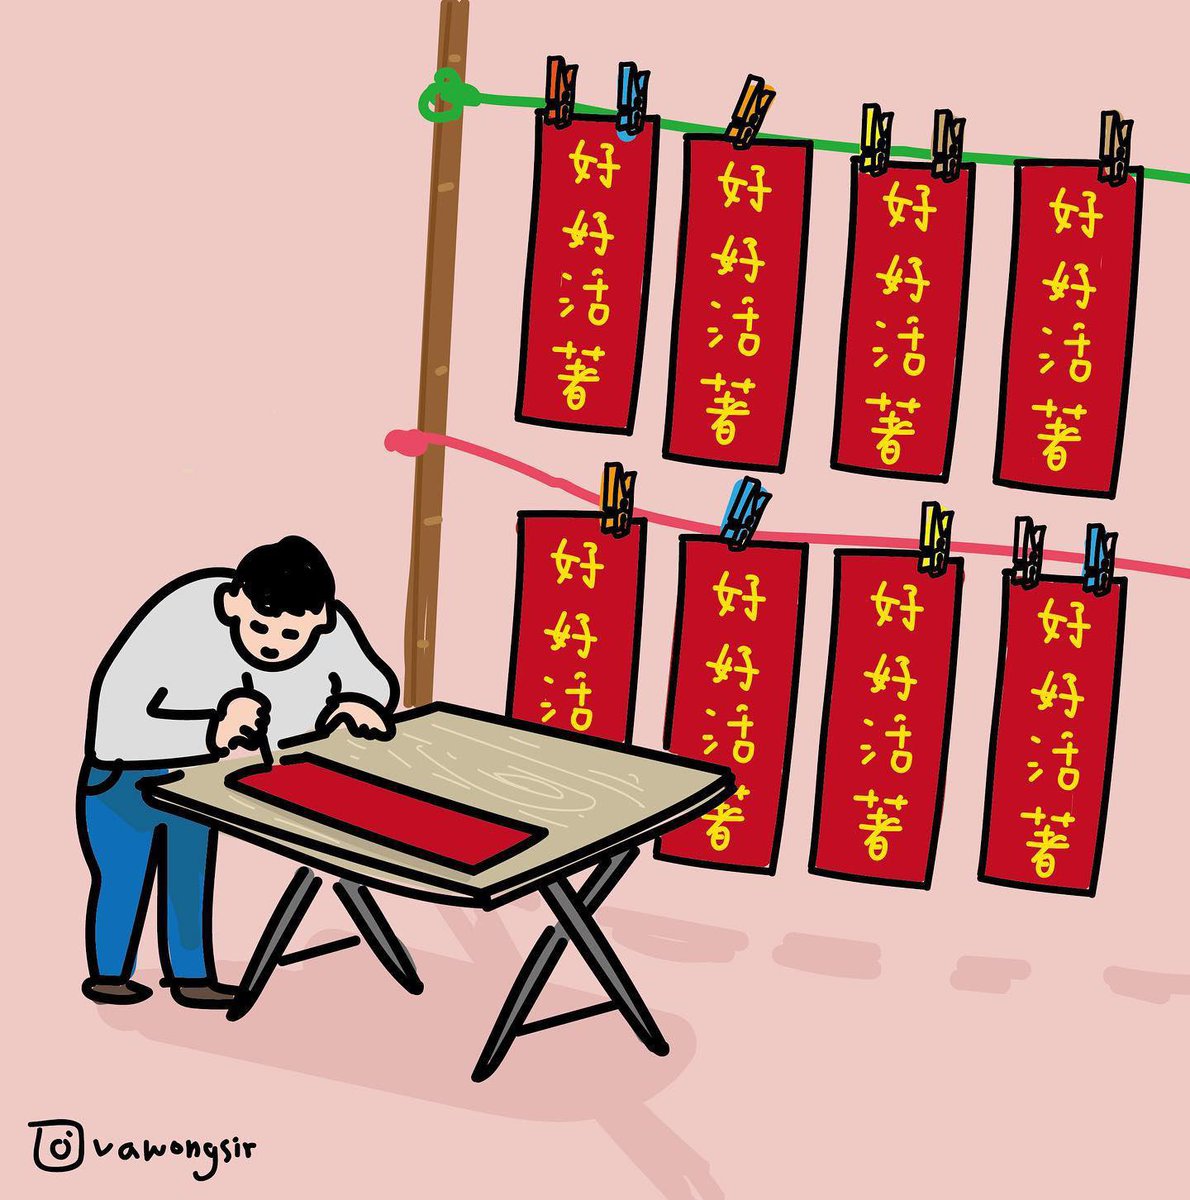 The latest from exiled #HongKong cartoonist @vawongsir just ahead of #LunarNewYear: the calligrapher makes multiple 揮春 (fai chun), all reading, “Live well,” the mantra of #HongKongers in this dark time of oppression. We wish the same to all HKers: live well! #香港人平安